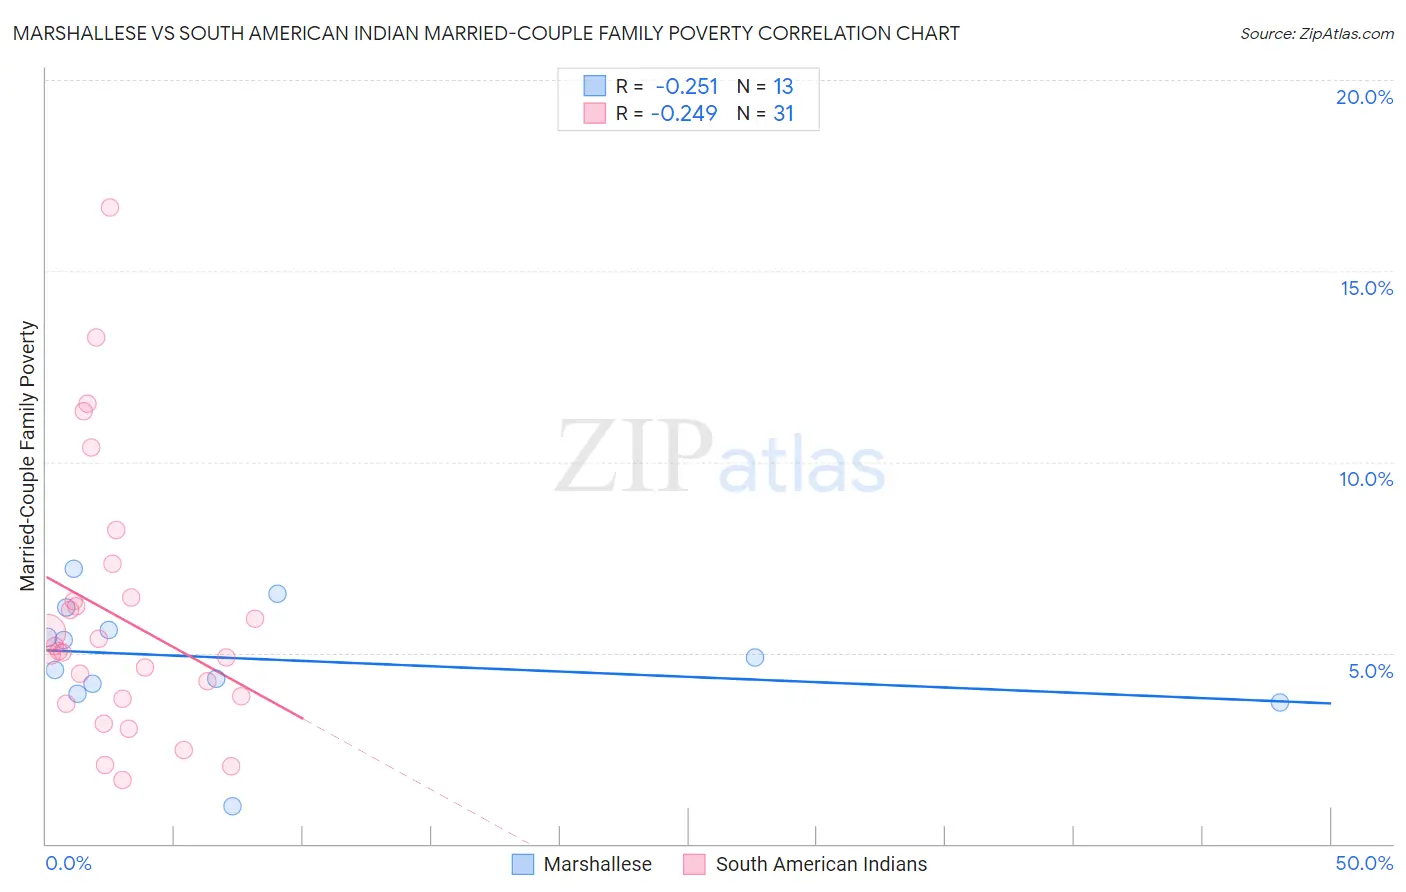 Marshallese vs South American Indian Married-Couple Family Poverty